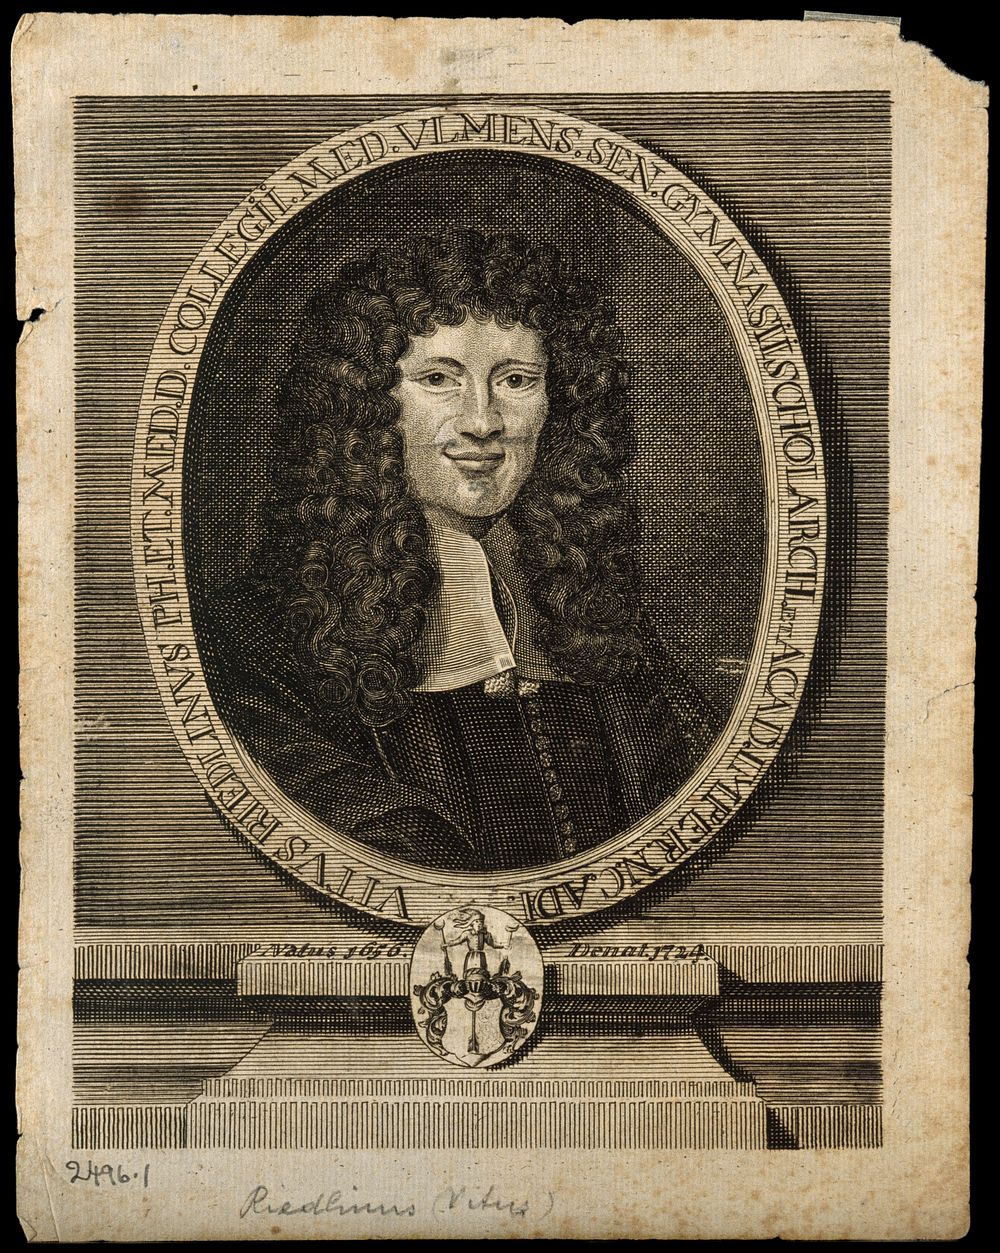 Vitus Riedlin the younger. Line engraving.